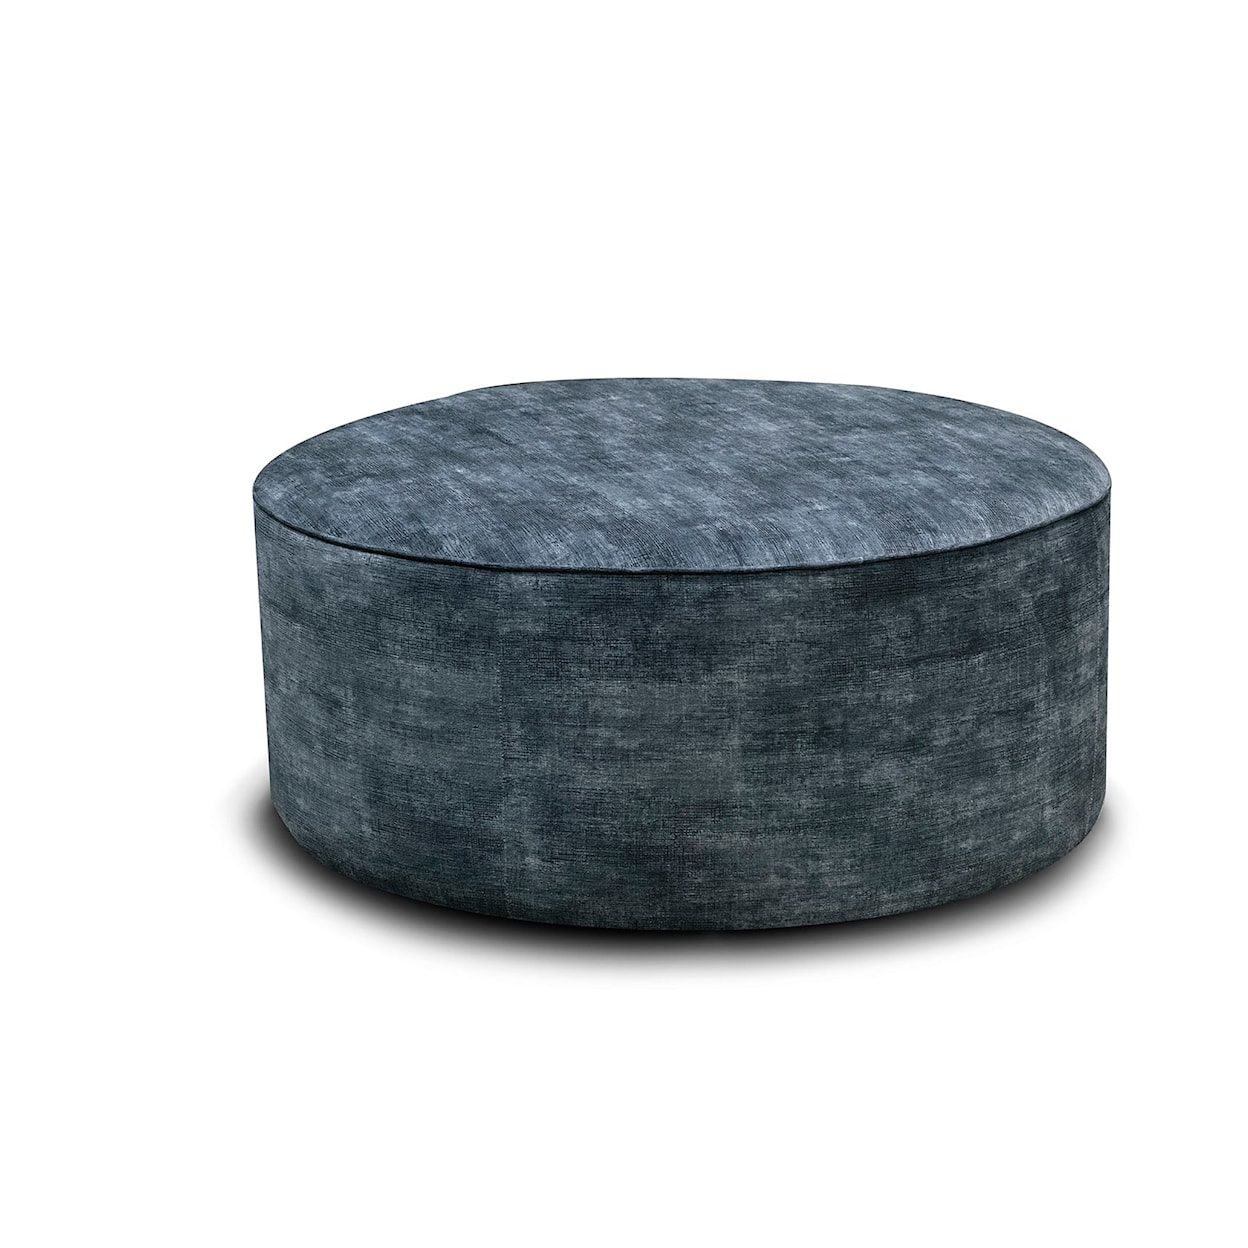 England 8V00/XL Series Extra Large Cocktail Ottoman